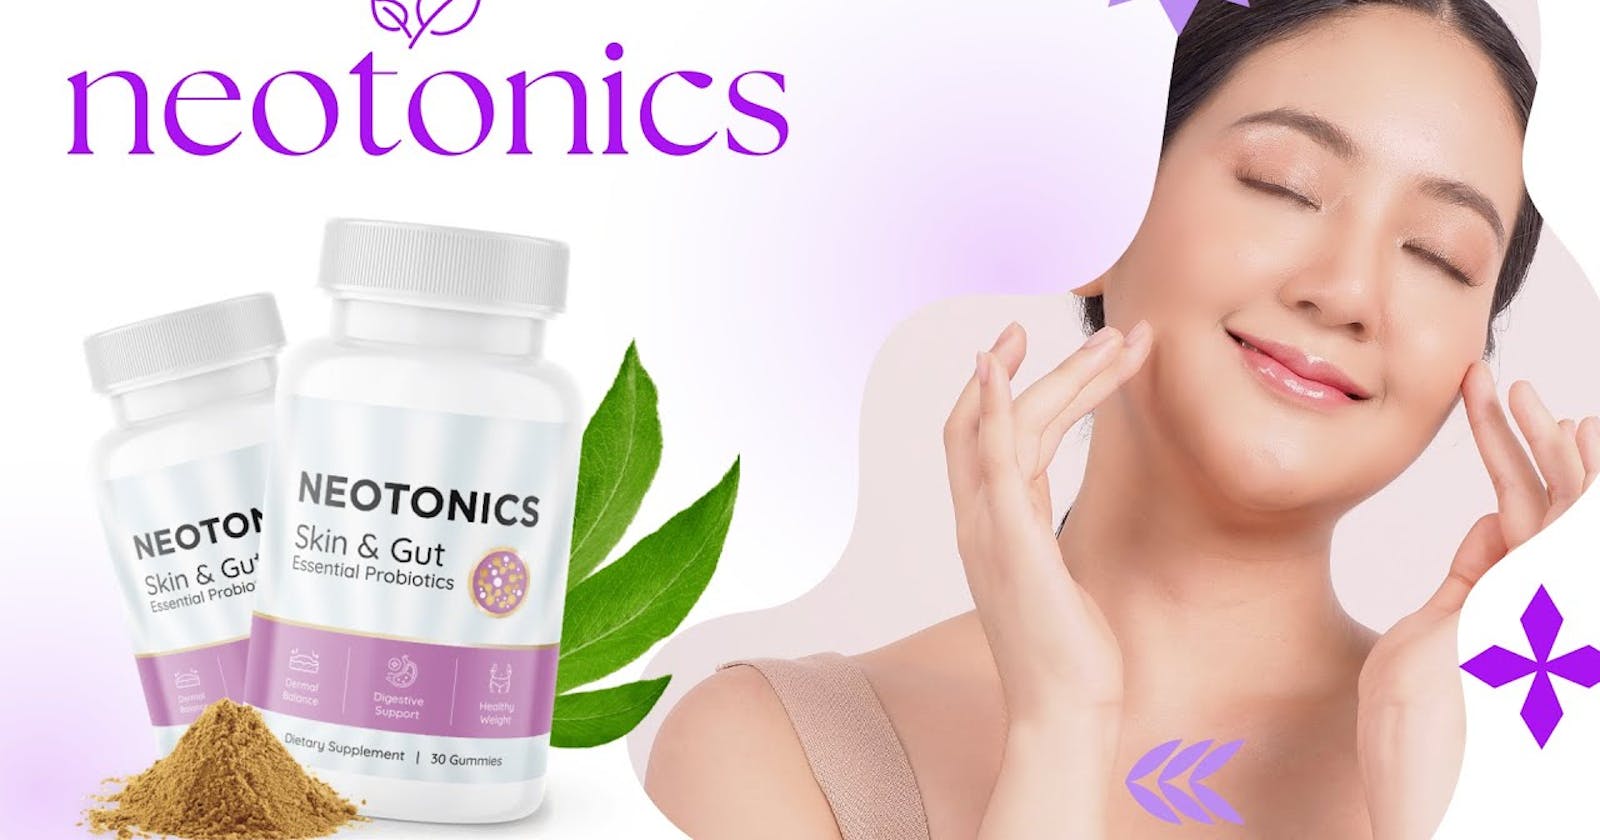 NeoTonics Skin And Gut Reviews – Proven Brand Formula Official Website!